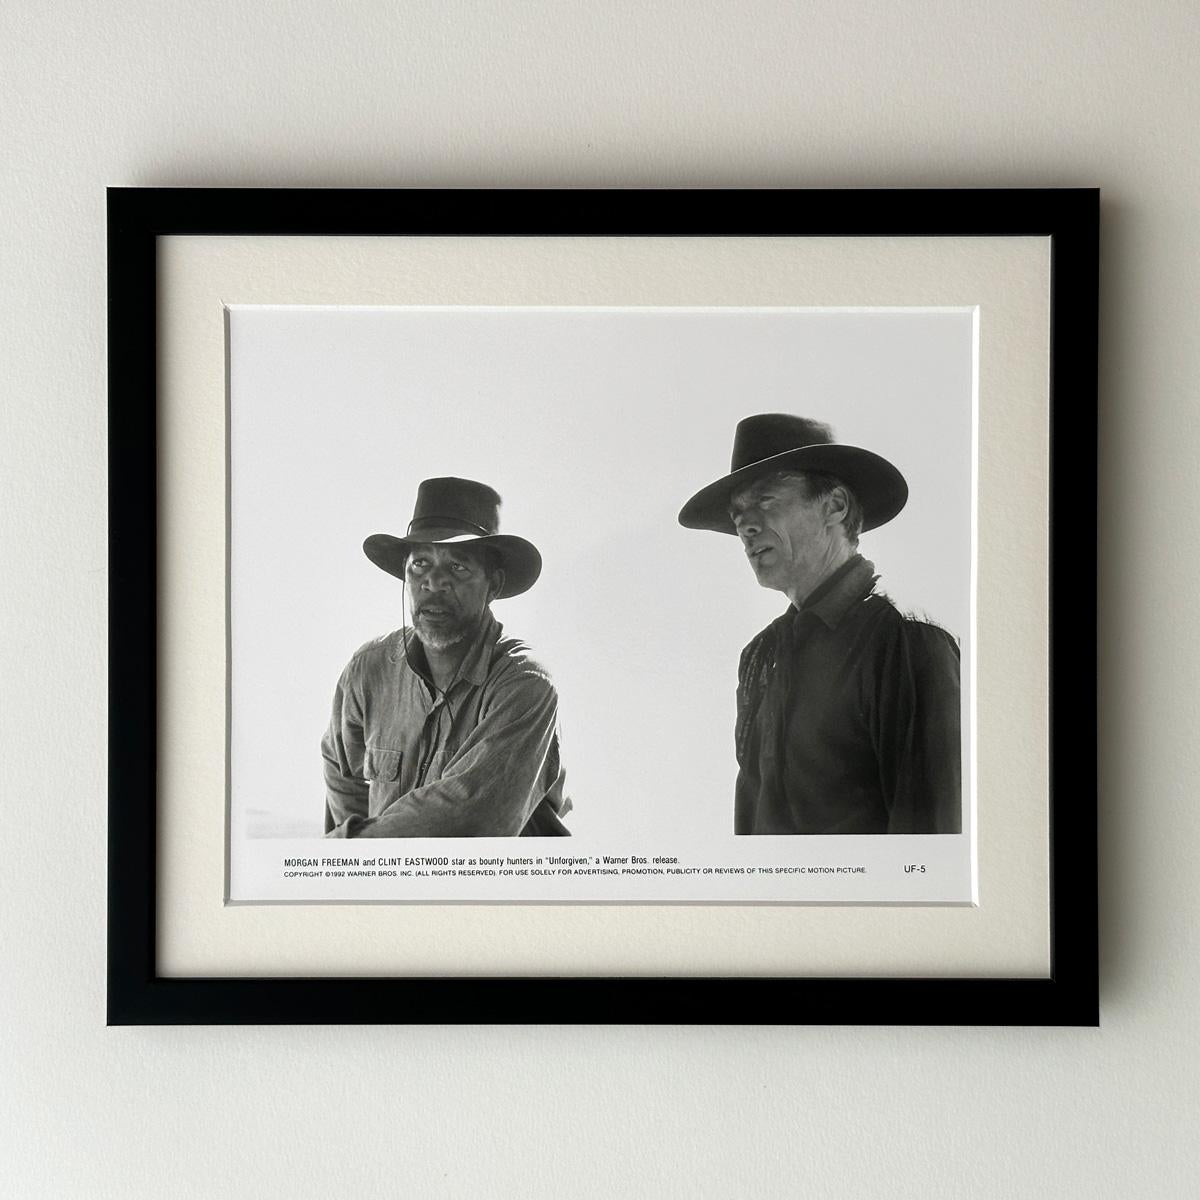 Original Warner Bros 8x10 inches Publicity Still for Clint Eastwood's Unforgiven featuring a great image of Eastwood and Morgan Freeman.

Unforgiven bagged 4 Oscars, including Best Picture and Best Director for Eastwood. 

Publicity